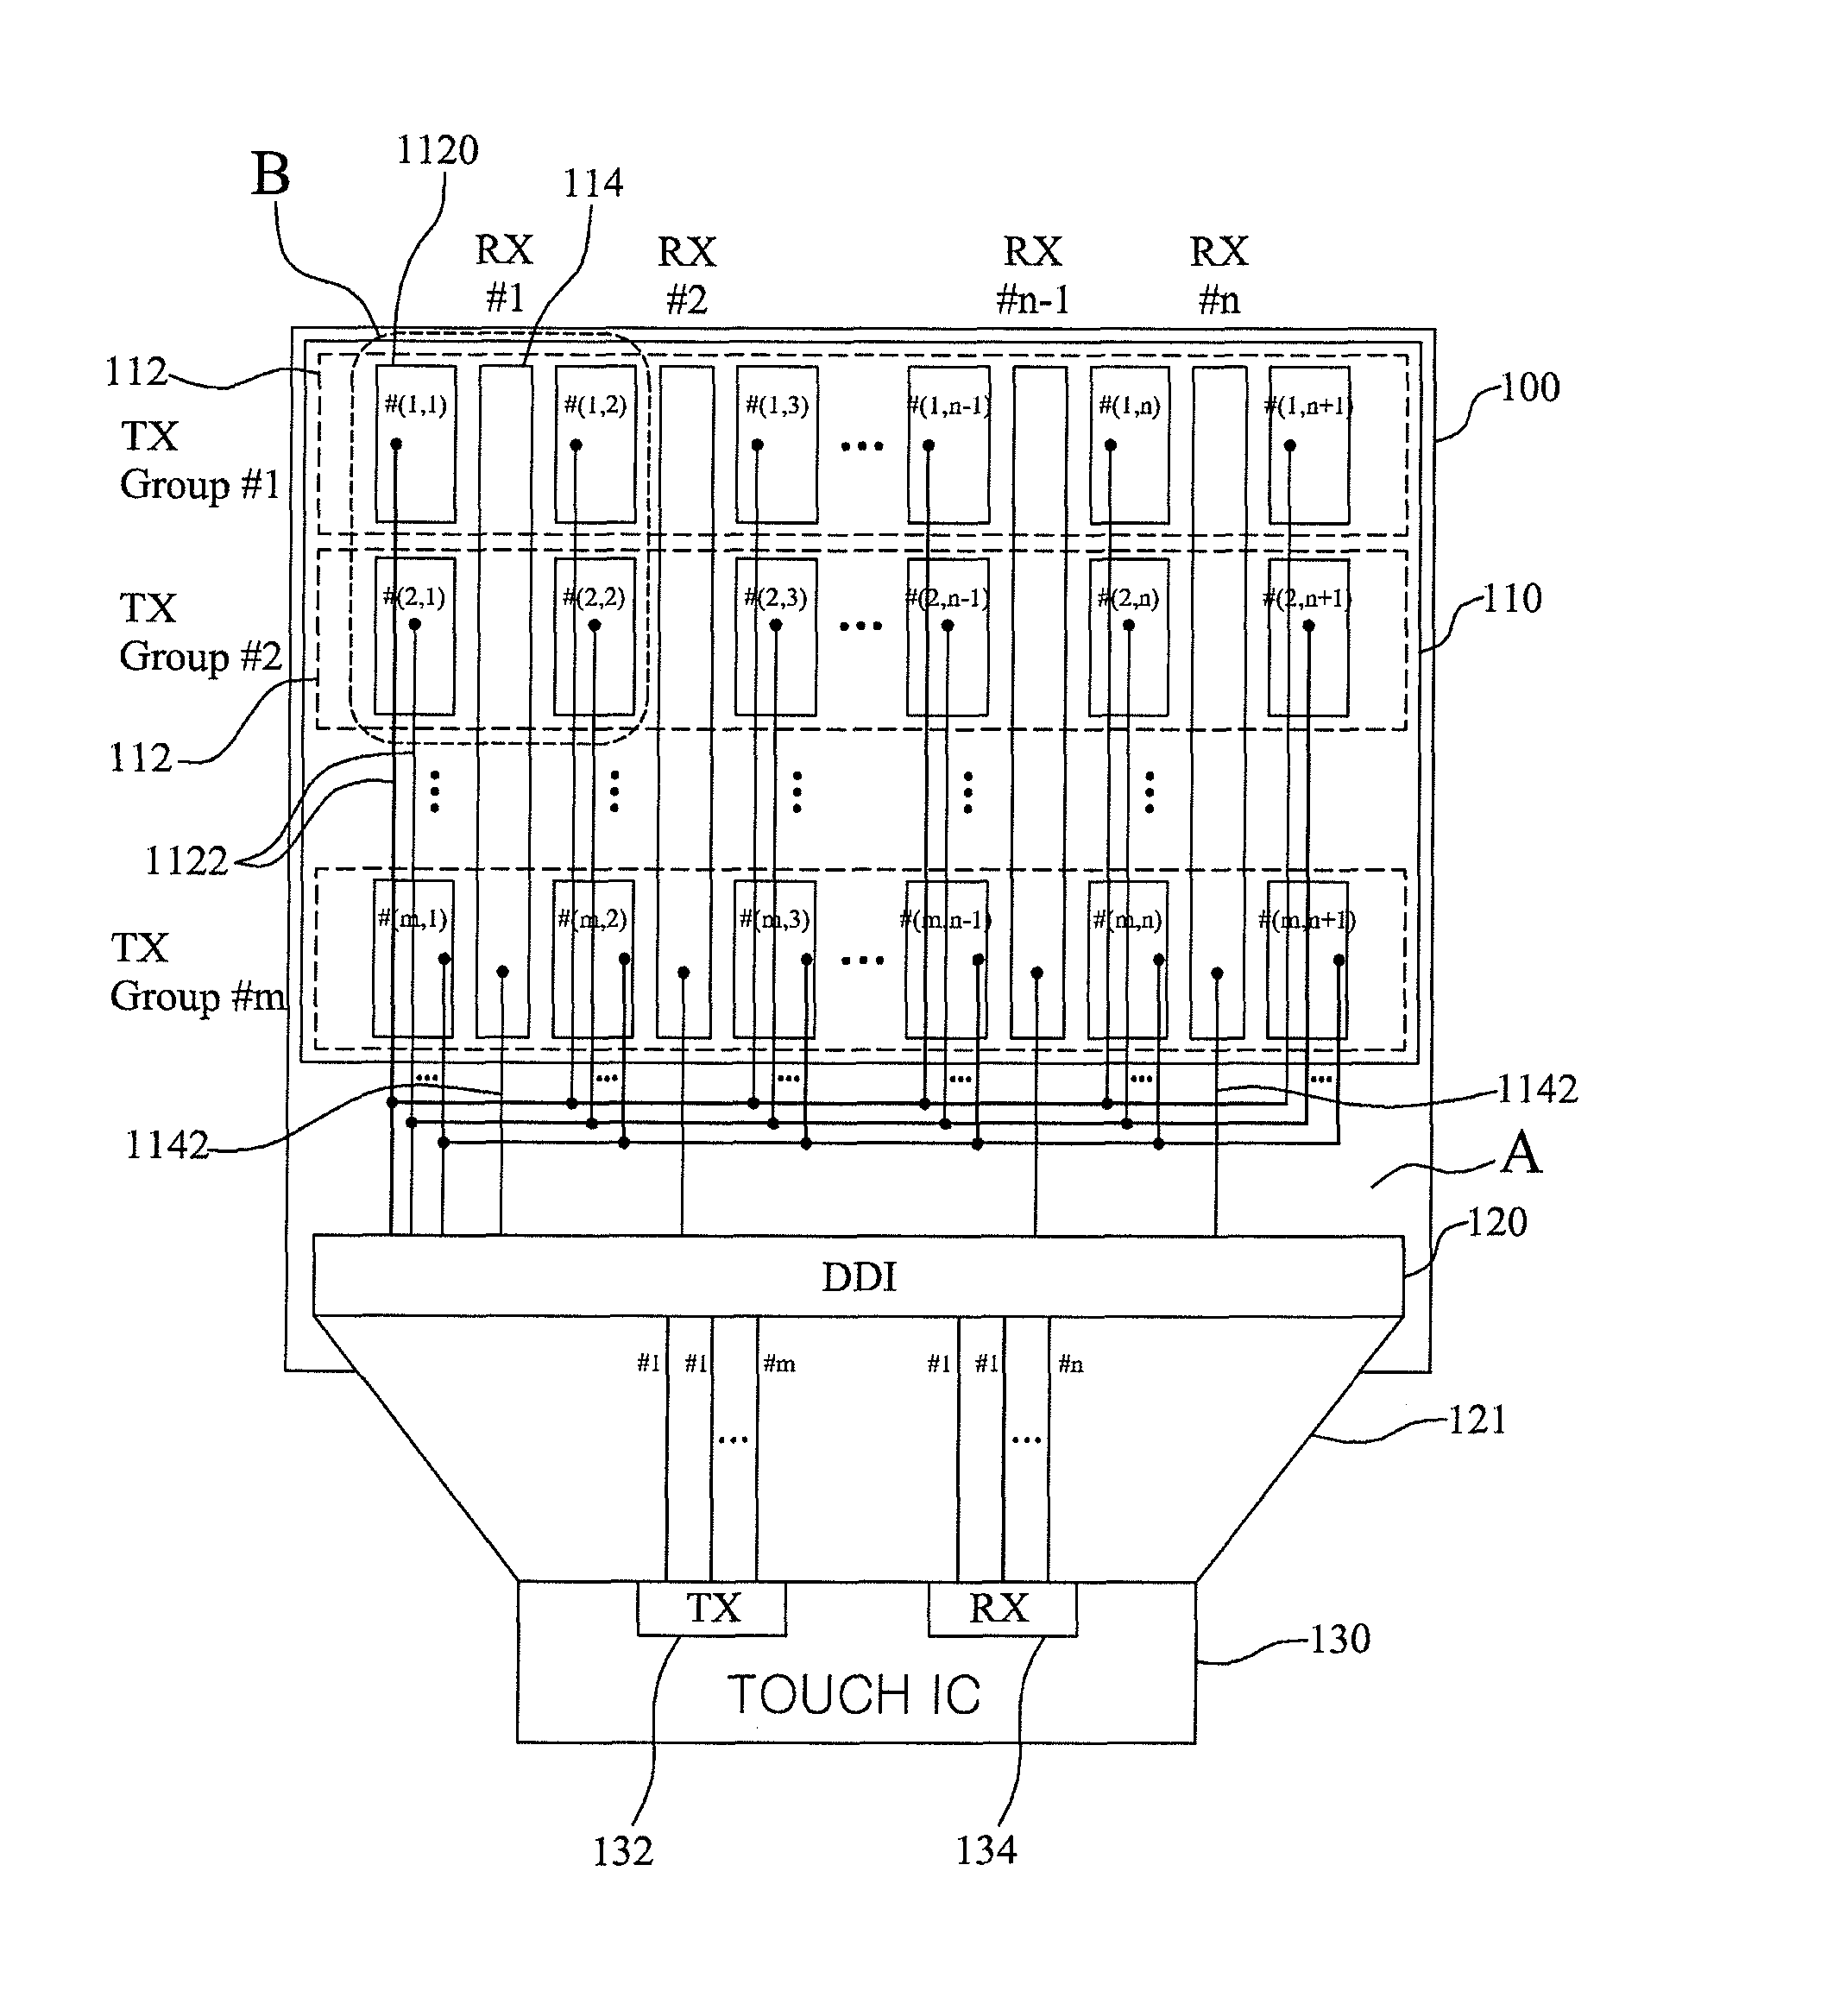 Display device with integrated touch screen